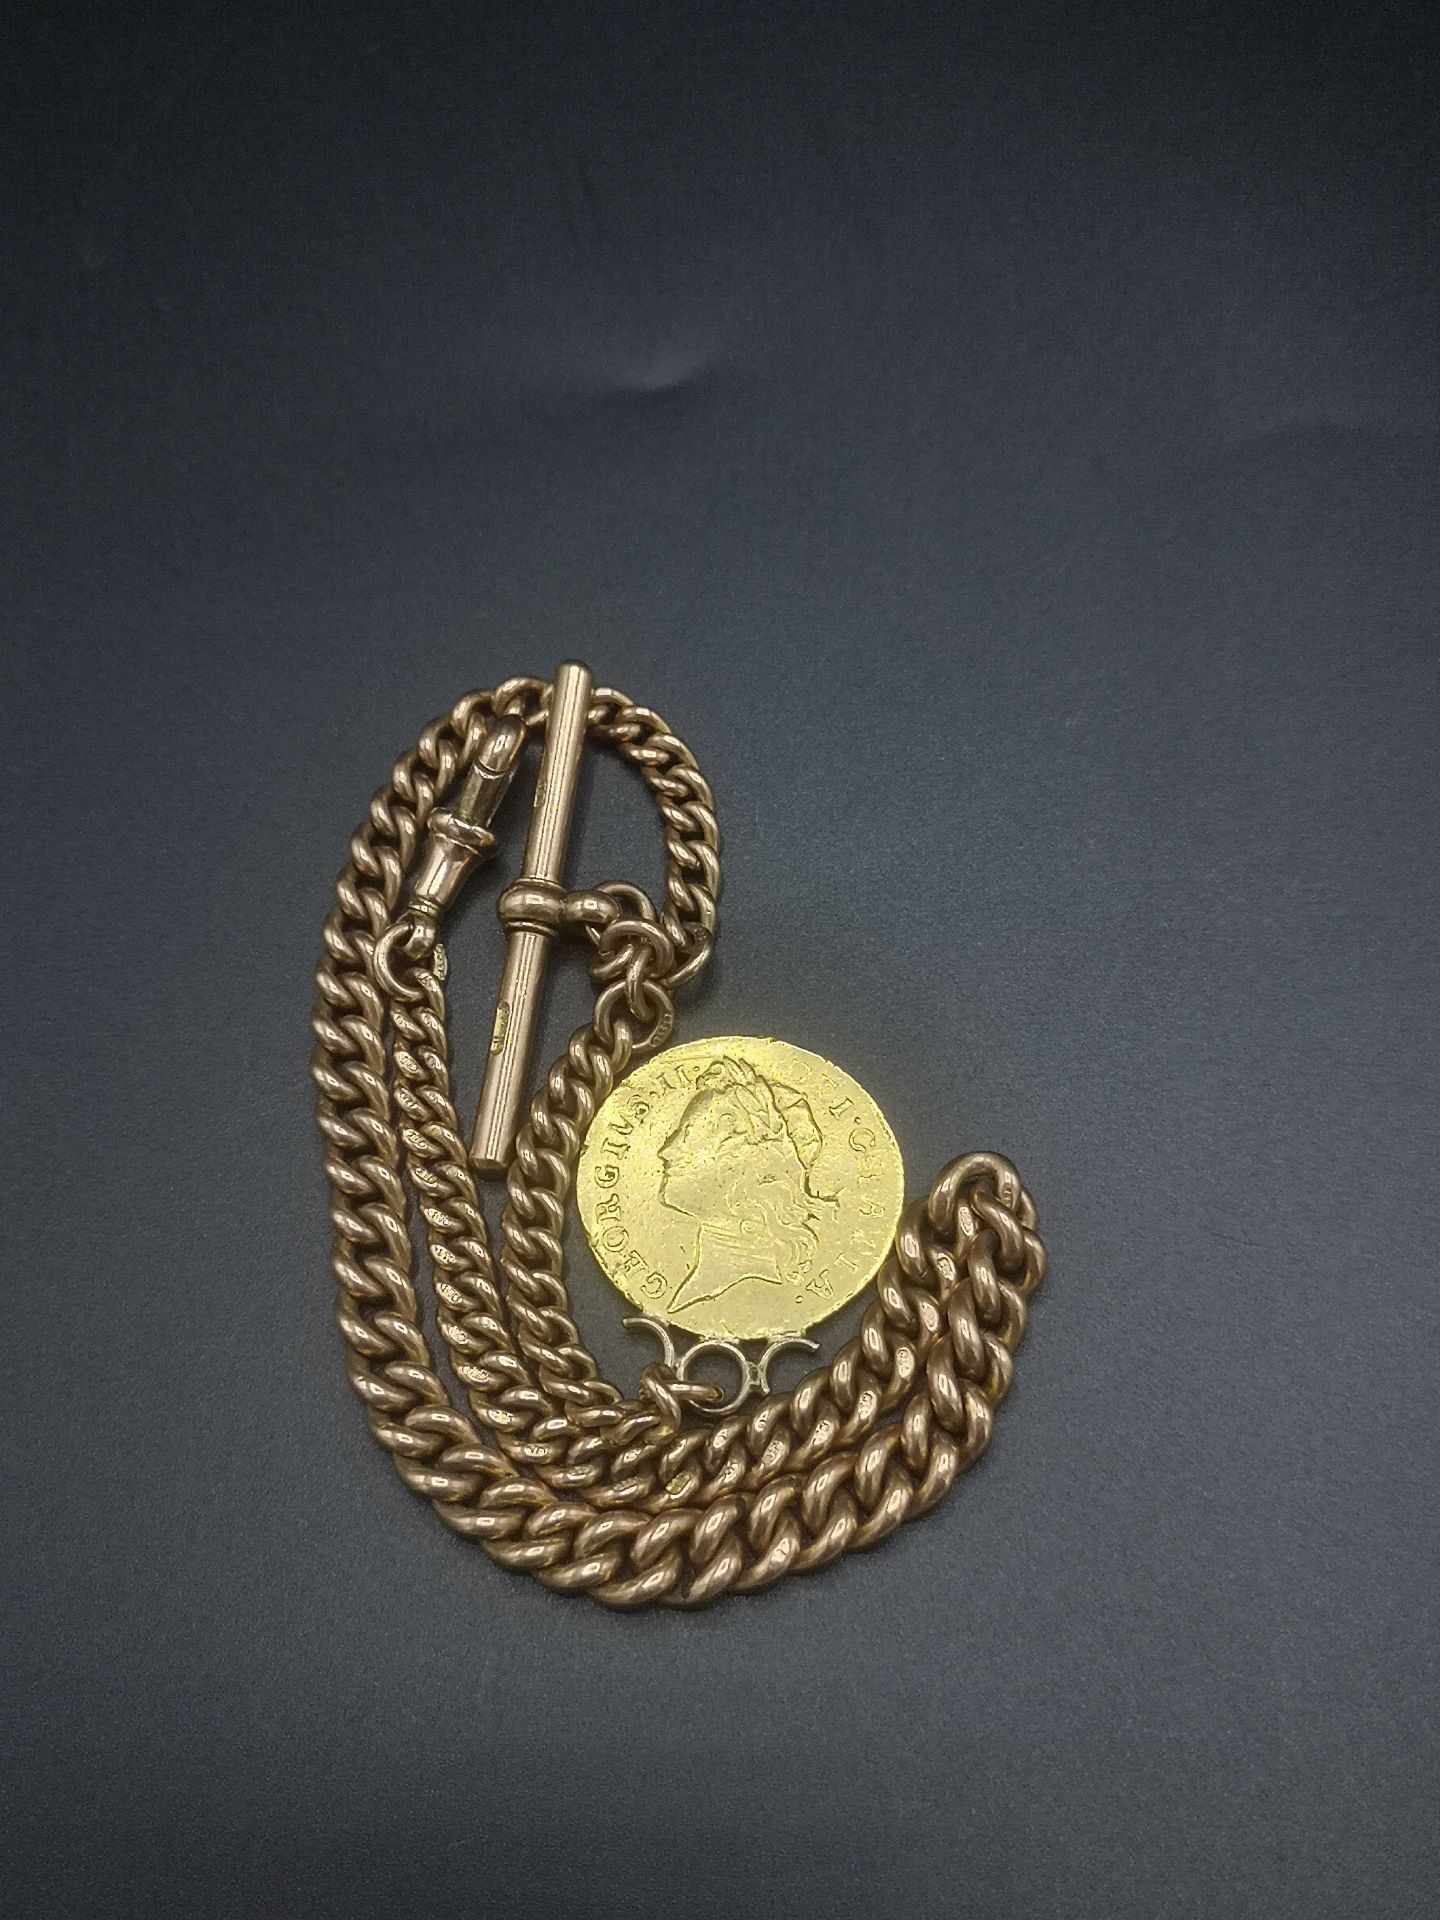 9ct gold fob chain with mounted George II guinea, 1736 - Image 5 of 5